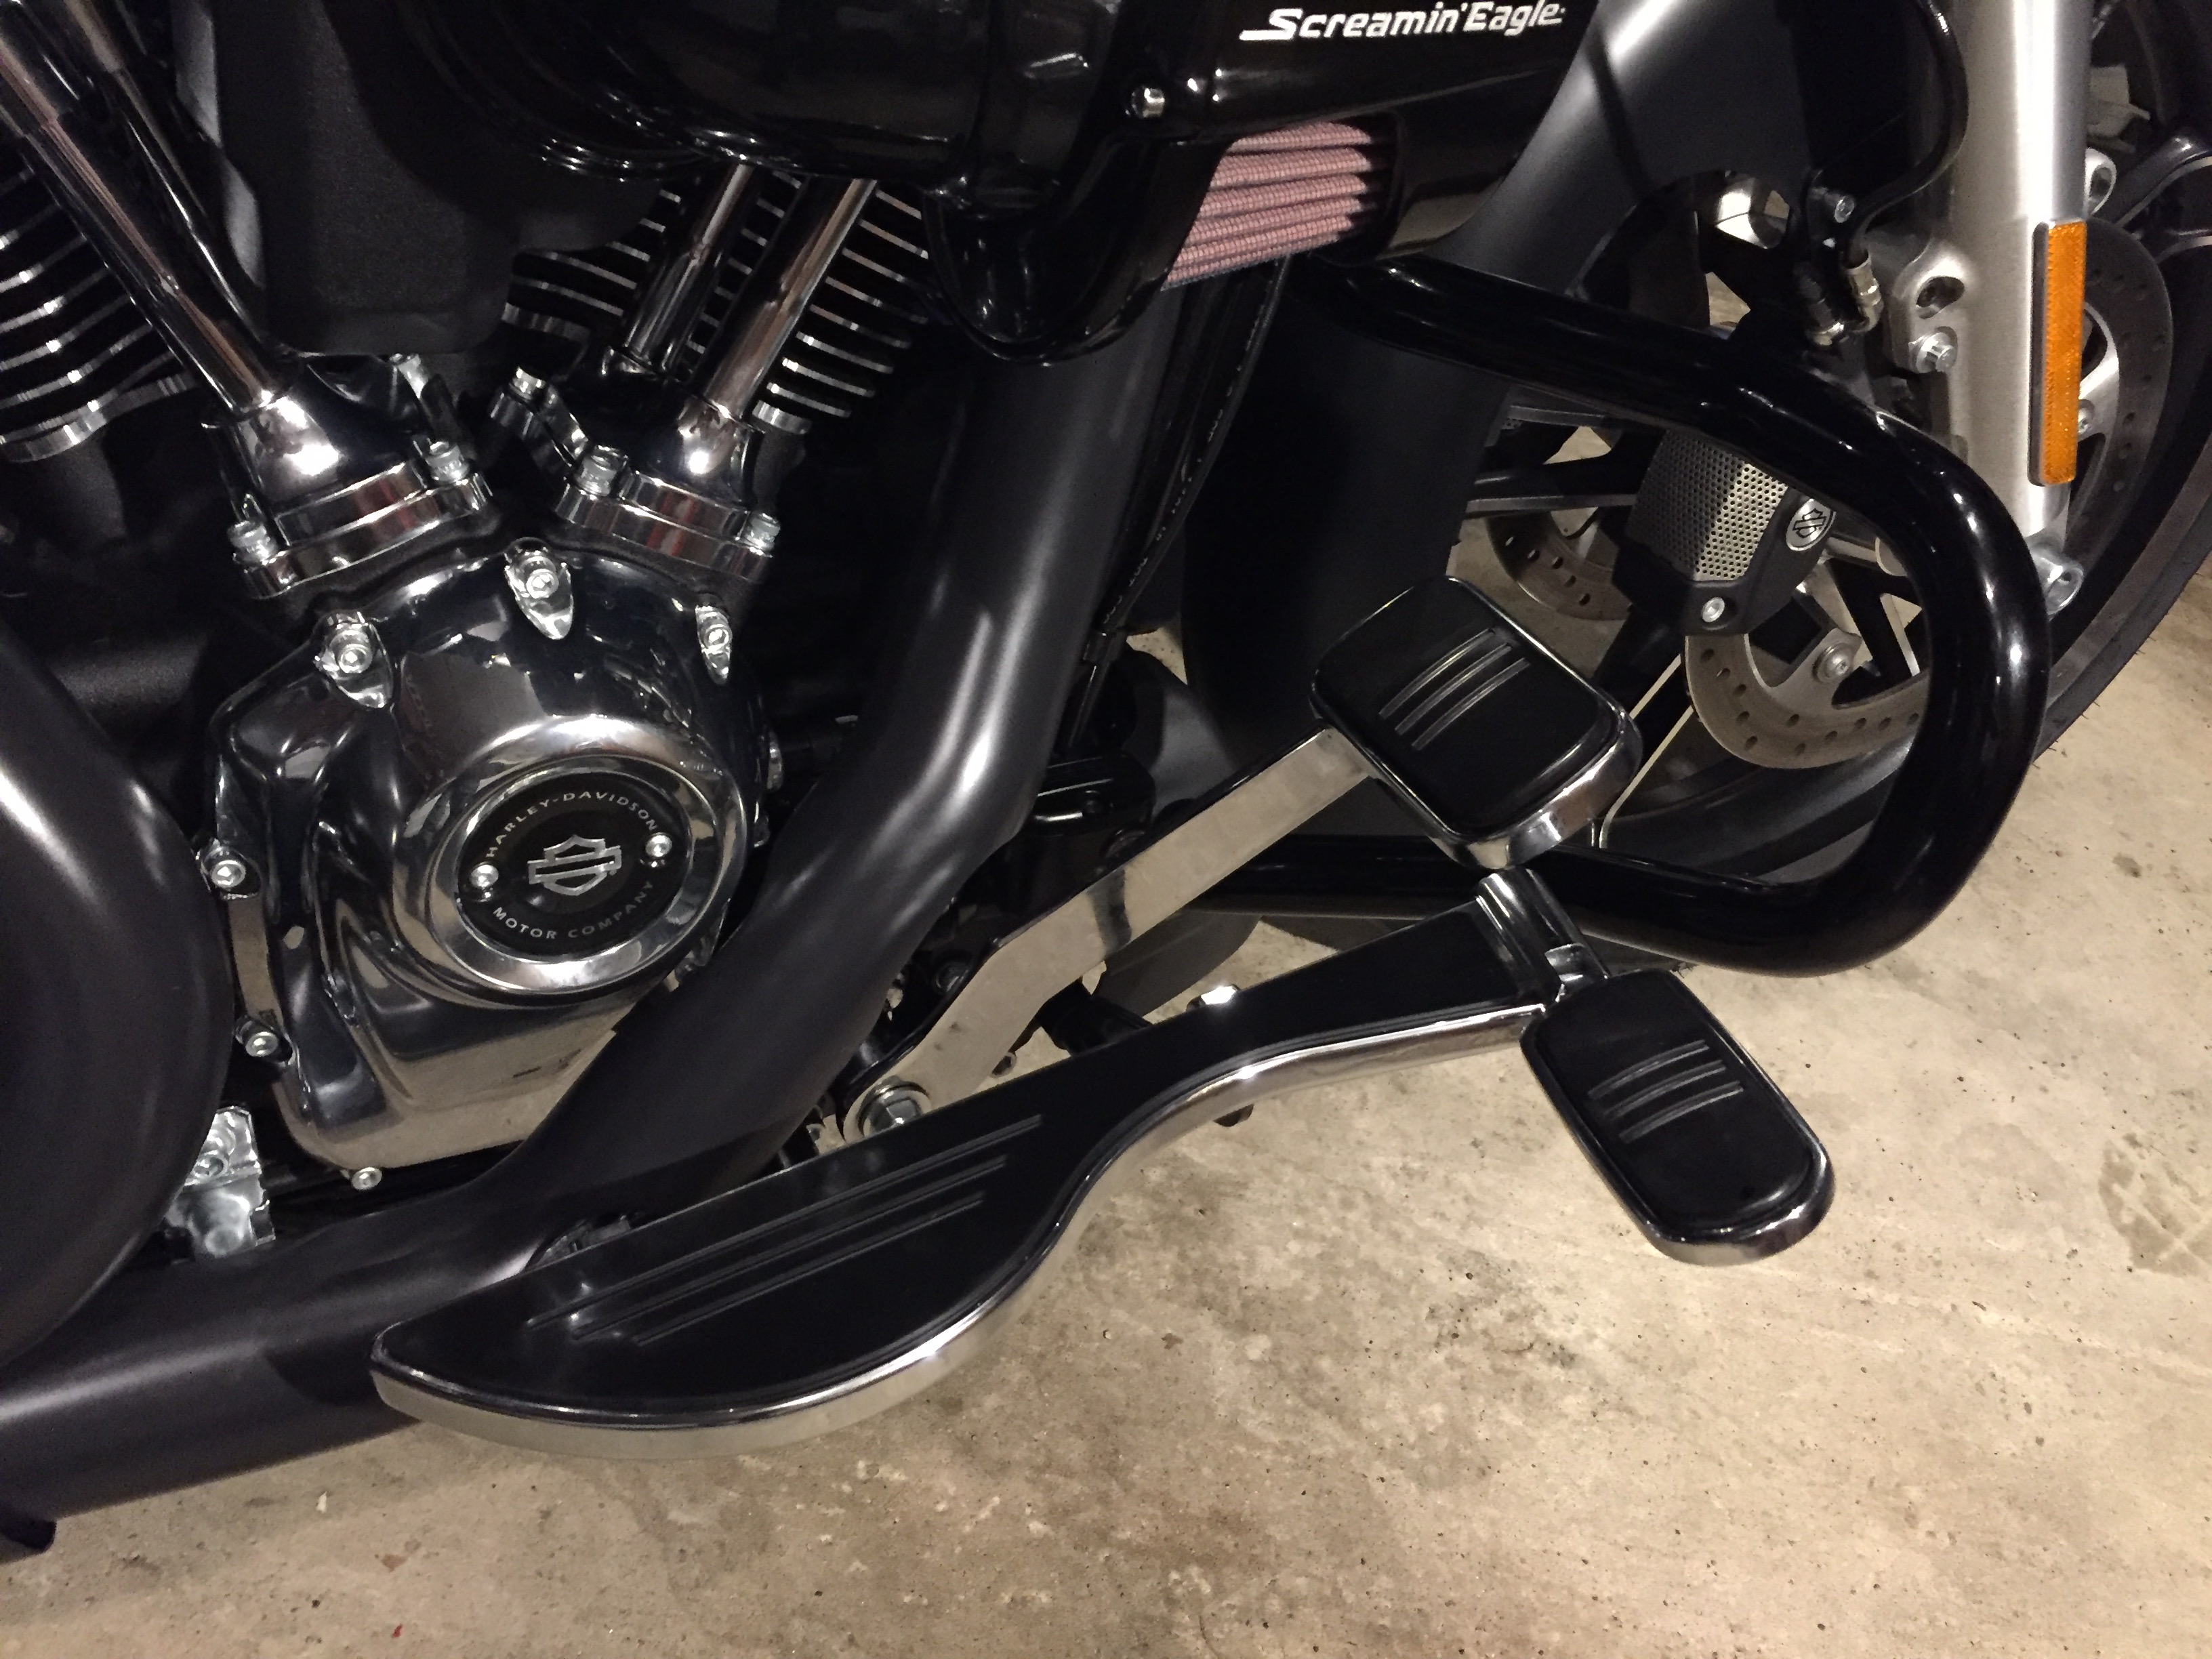 Road Glide Chopped Engine Guard With Highway Pegs Harley Davidson Forums